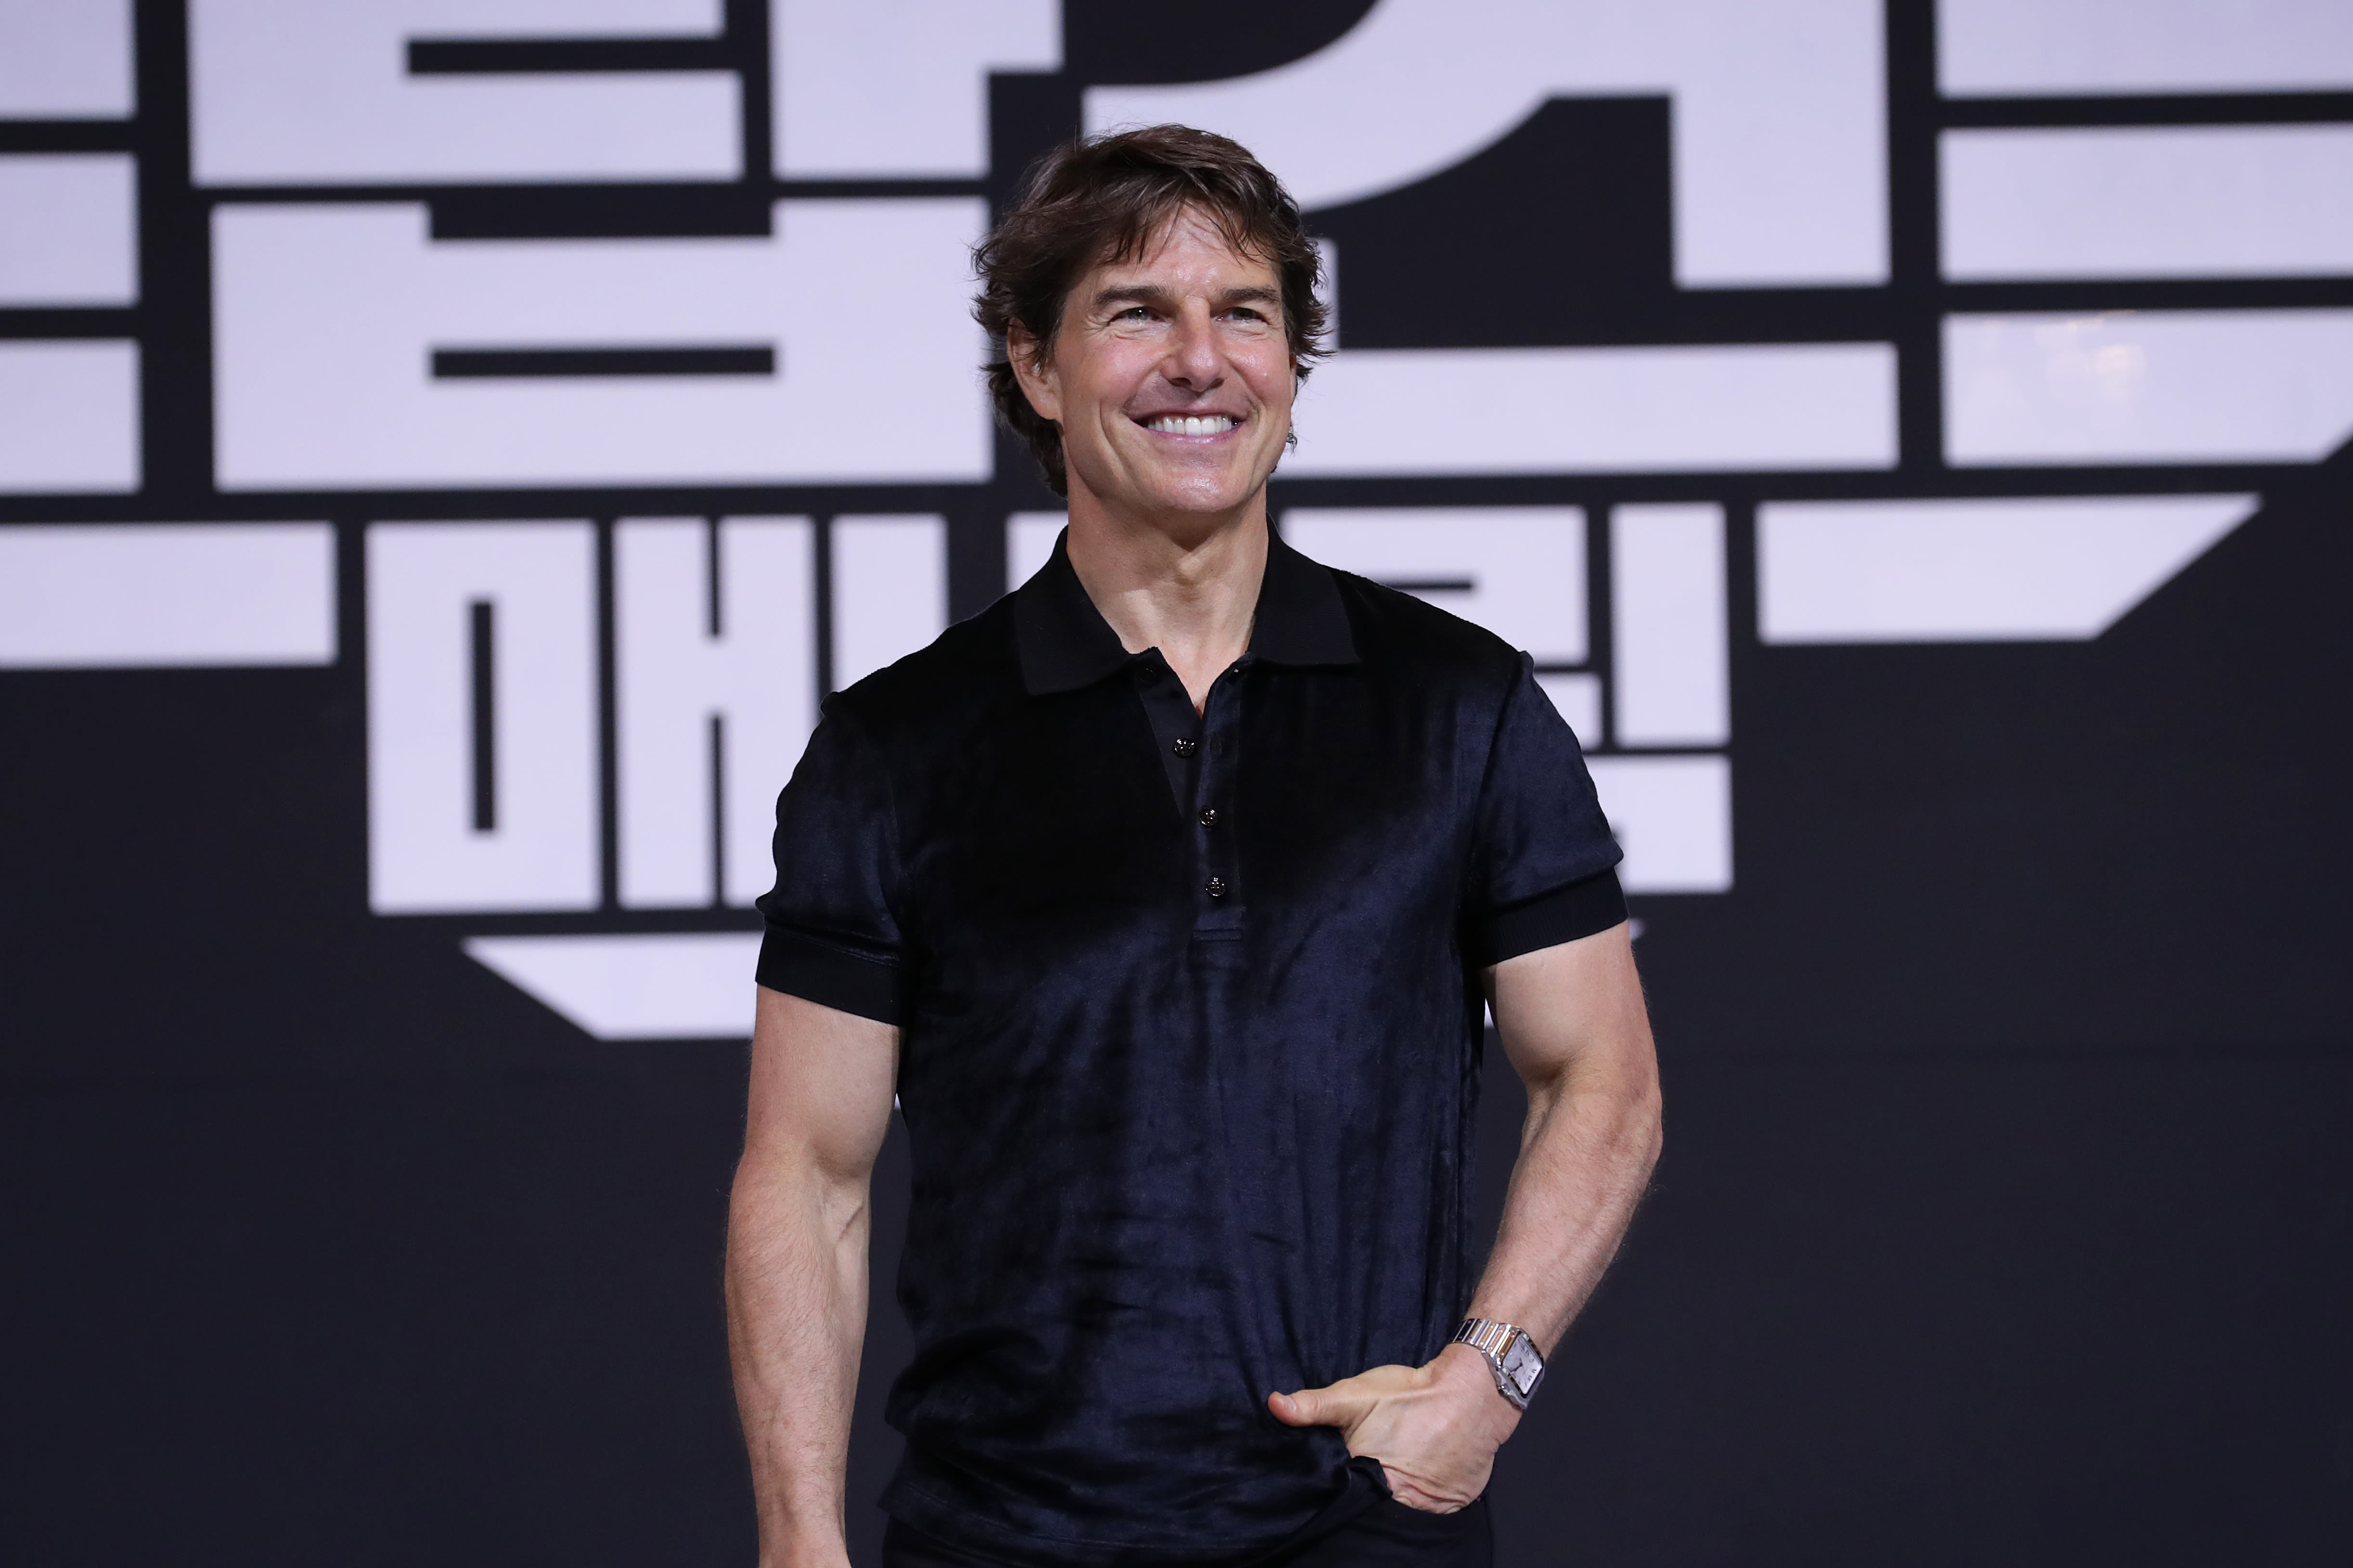 An Impossible Mission? Tom Cruise’s Extremely Strict Diet Revealed as Movie Star Keeps Fit at 62